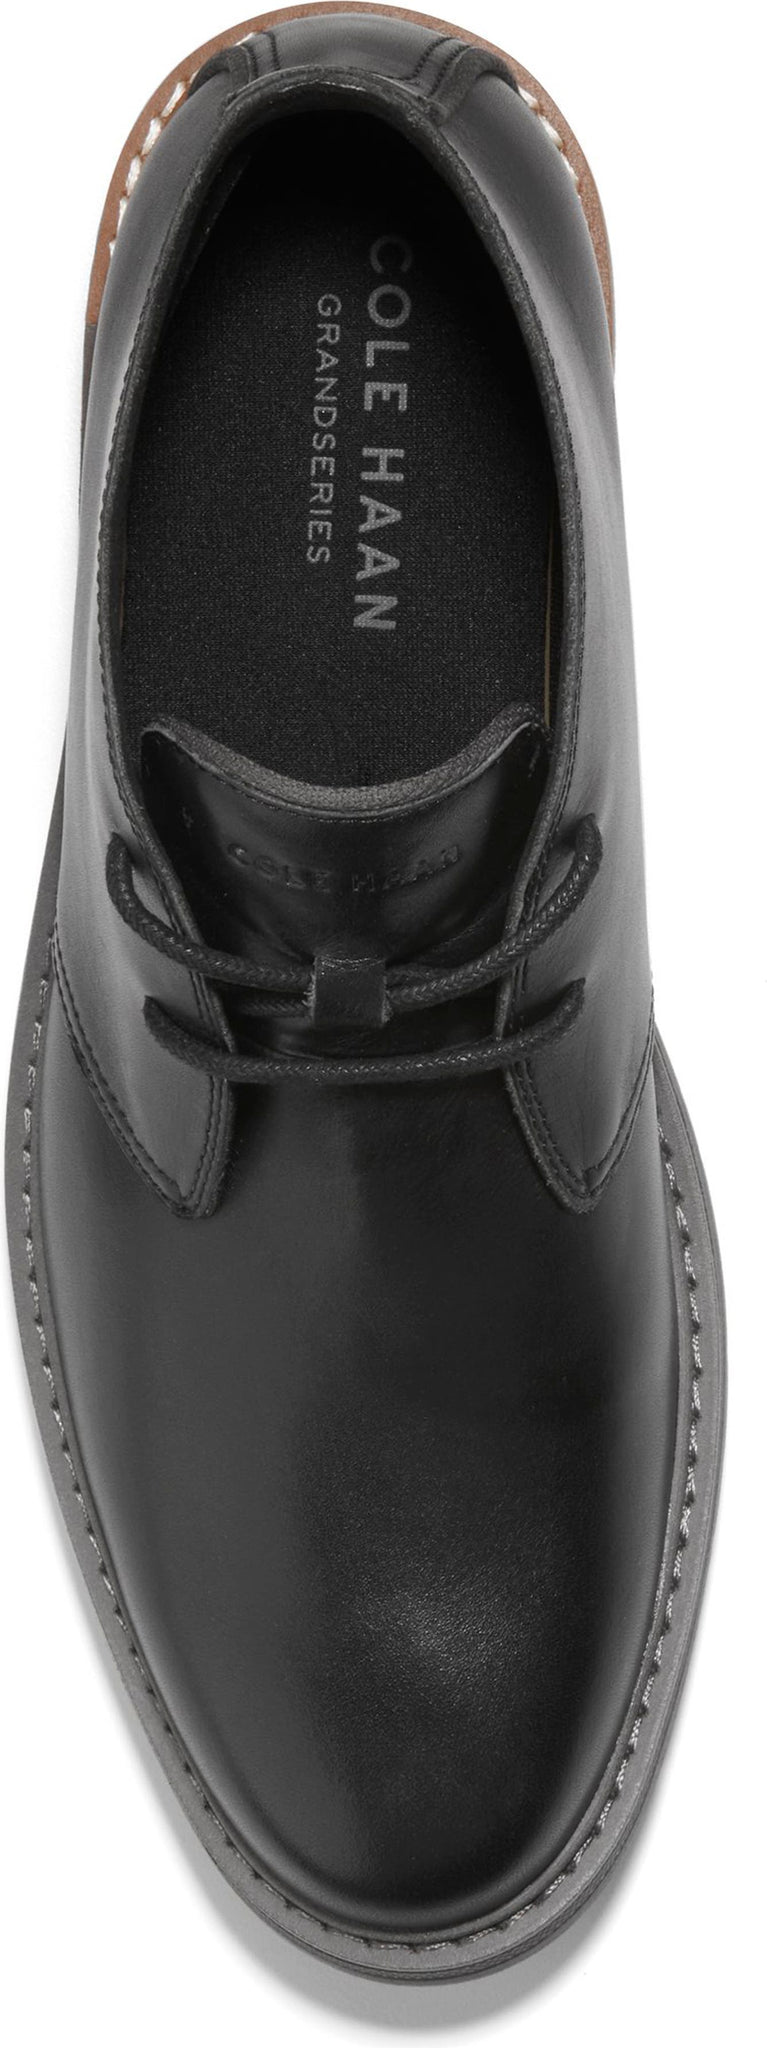 COLE HAAN Go-To Lace Chukka Boot, Alternate, color, BLACK/ CH DARK PAVEMENT